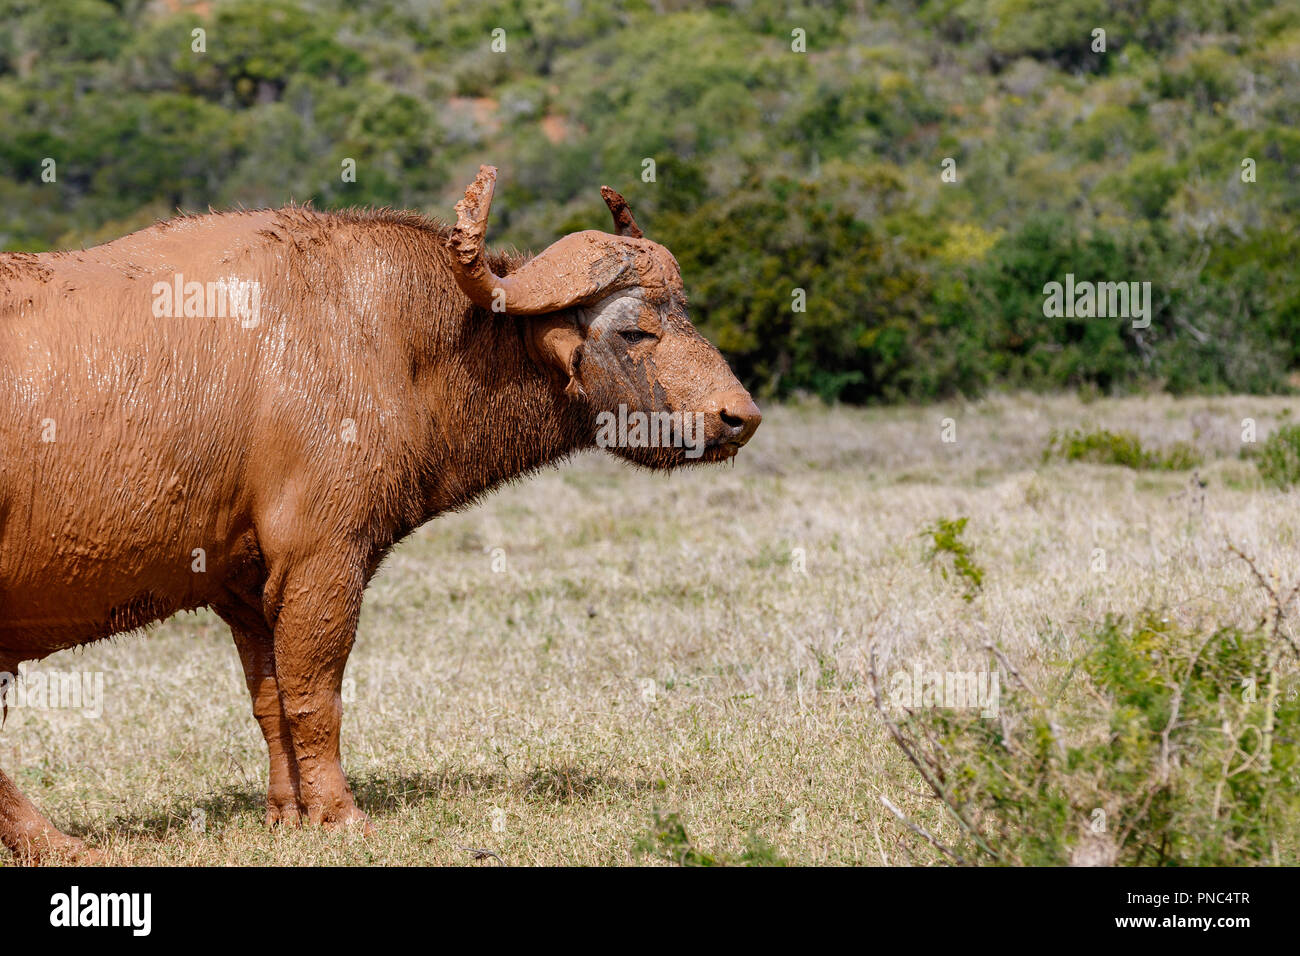 Buffalo standing full of mud in the field Stock Photo